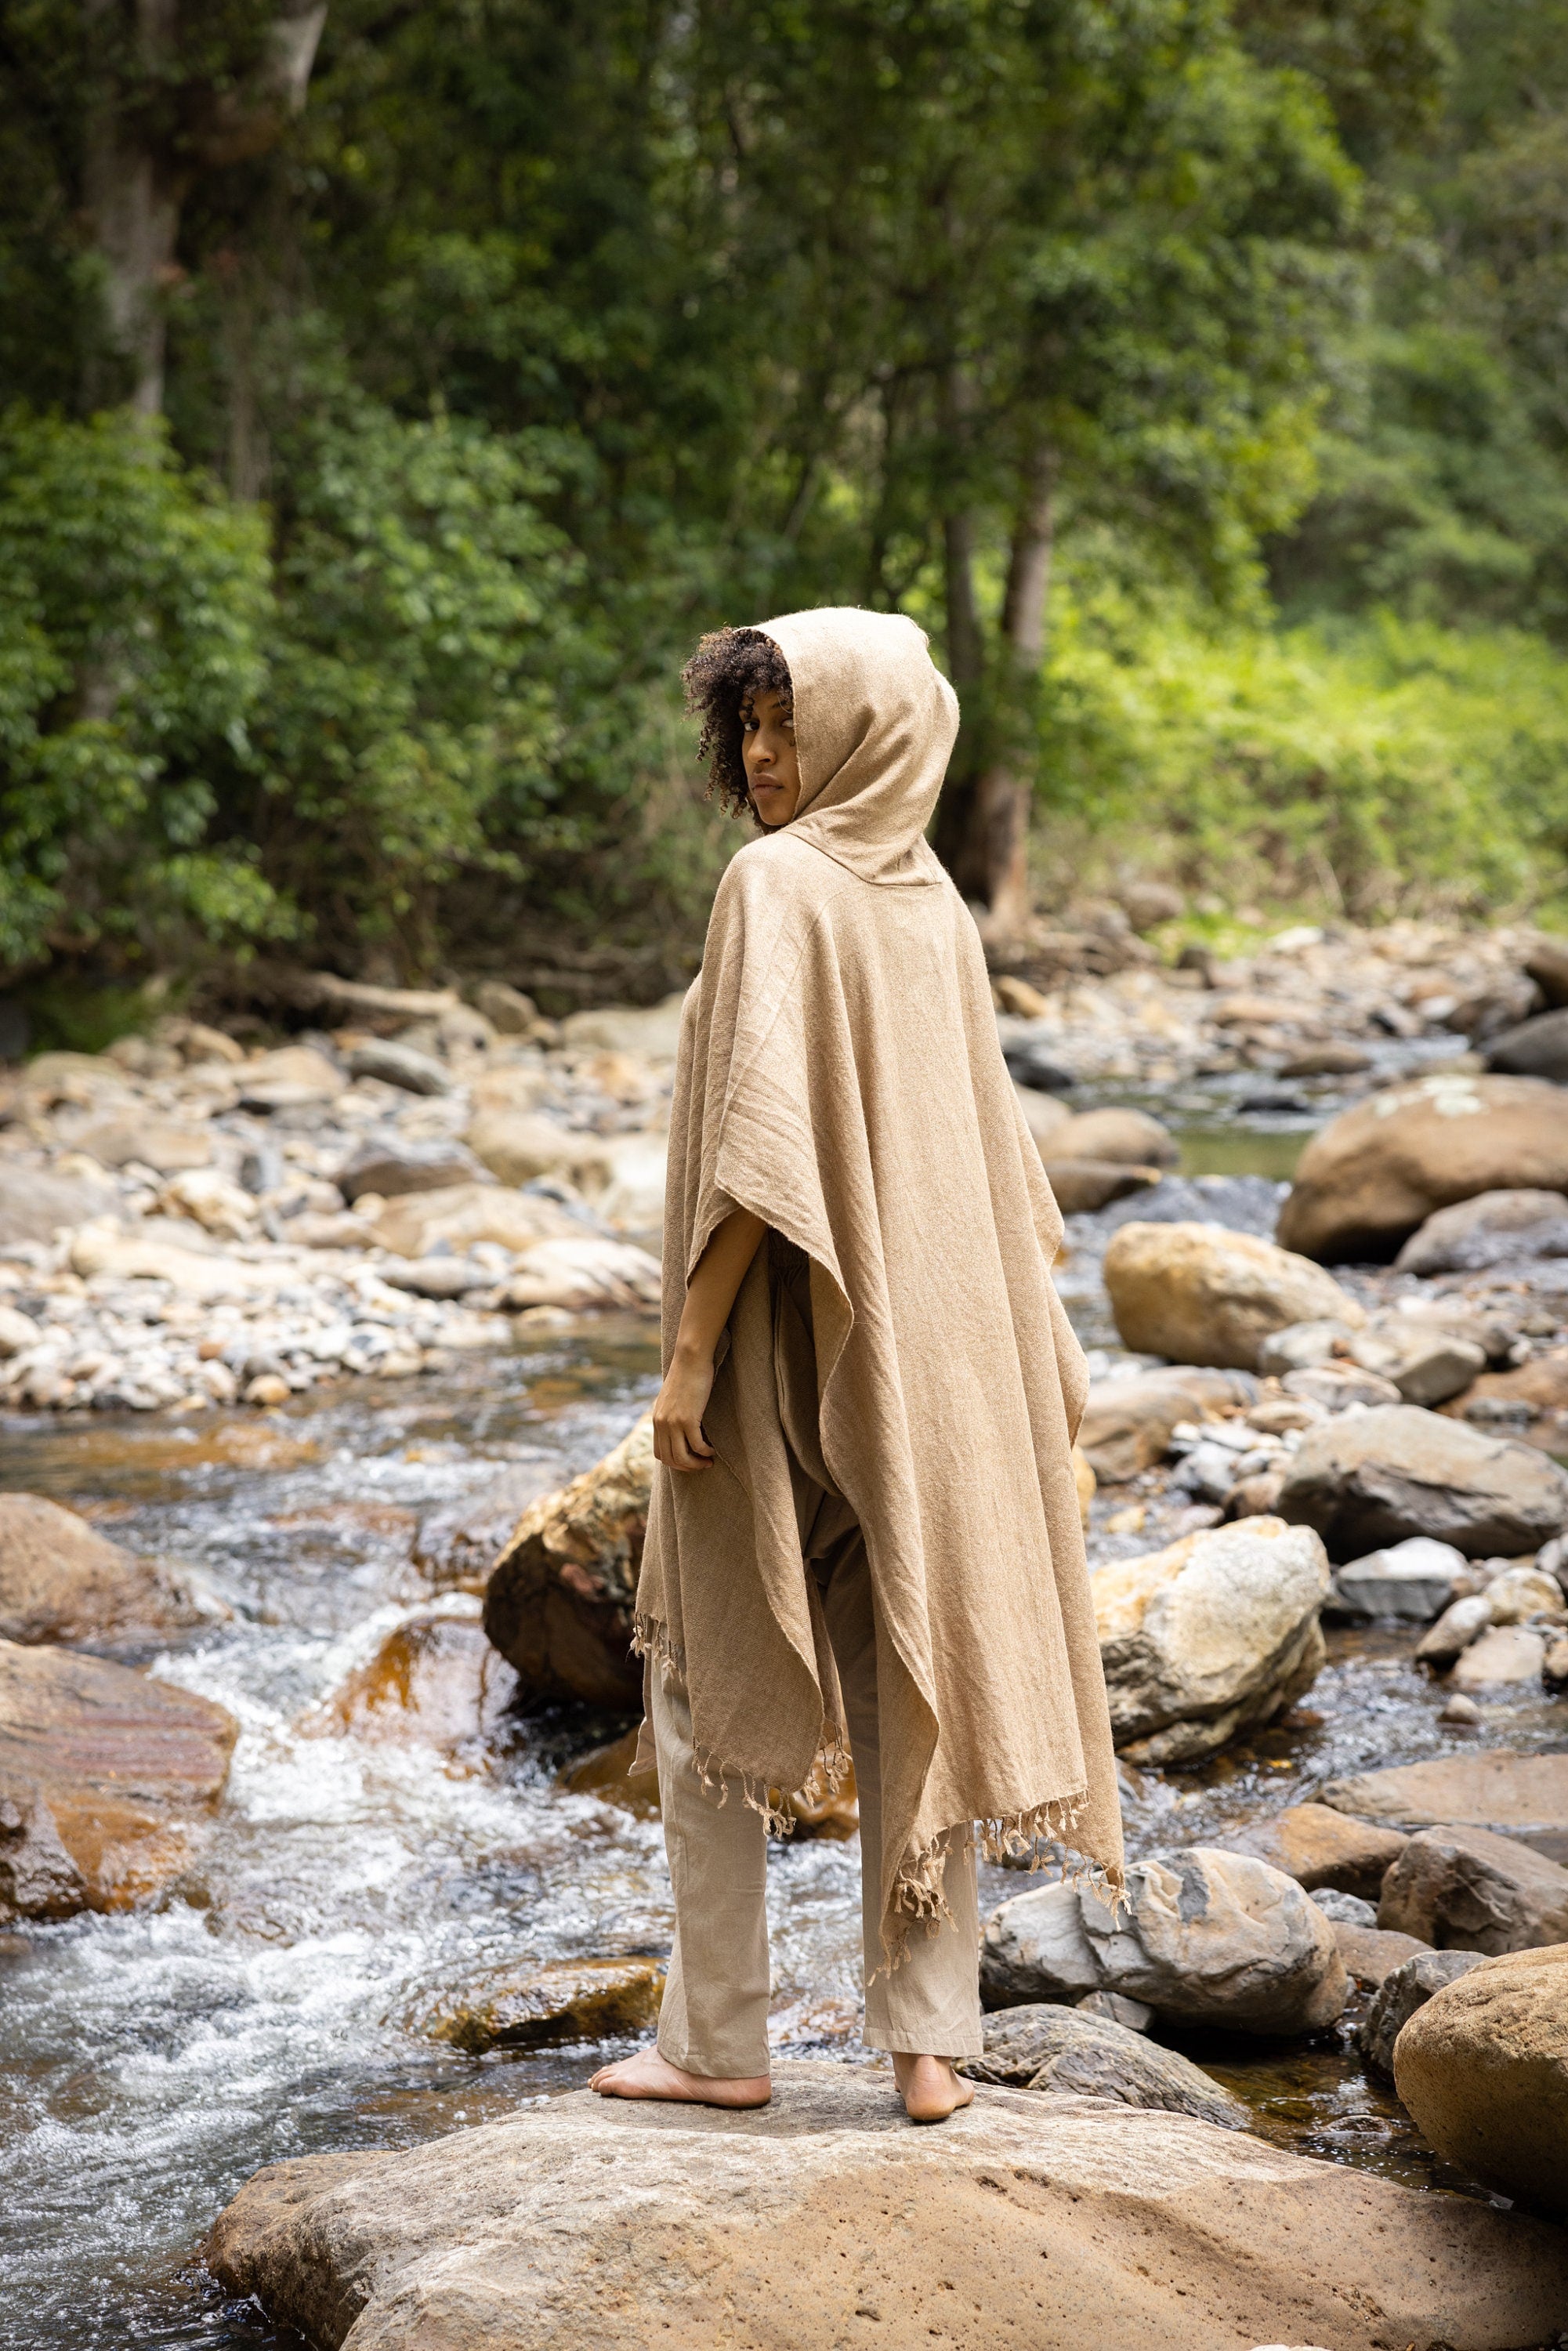 Our SAHAJI Poncho is carefully handwoven and made from 100% pure wool in an ancient traditional process without machinery, which makes every piece unique and personal.